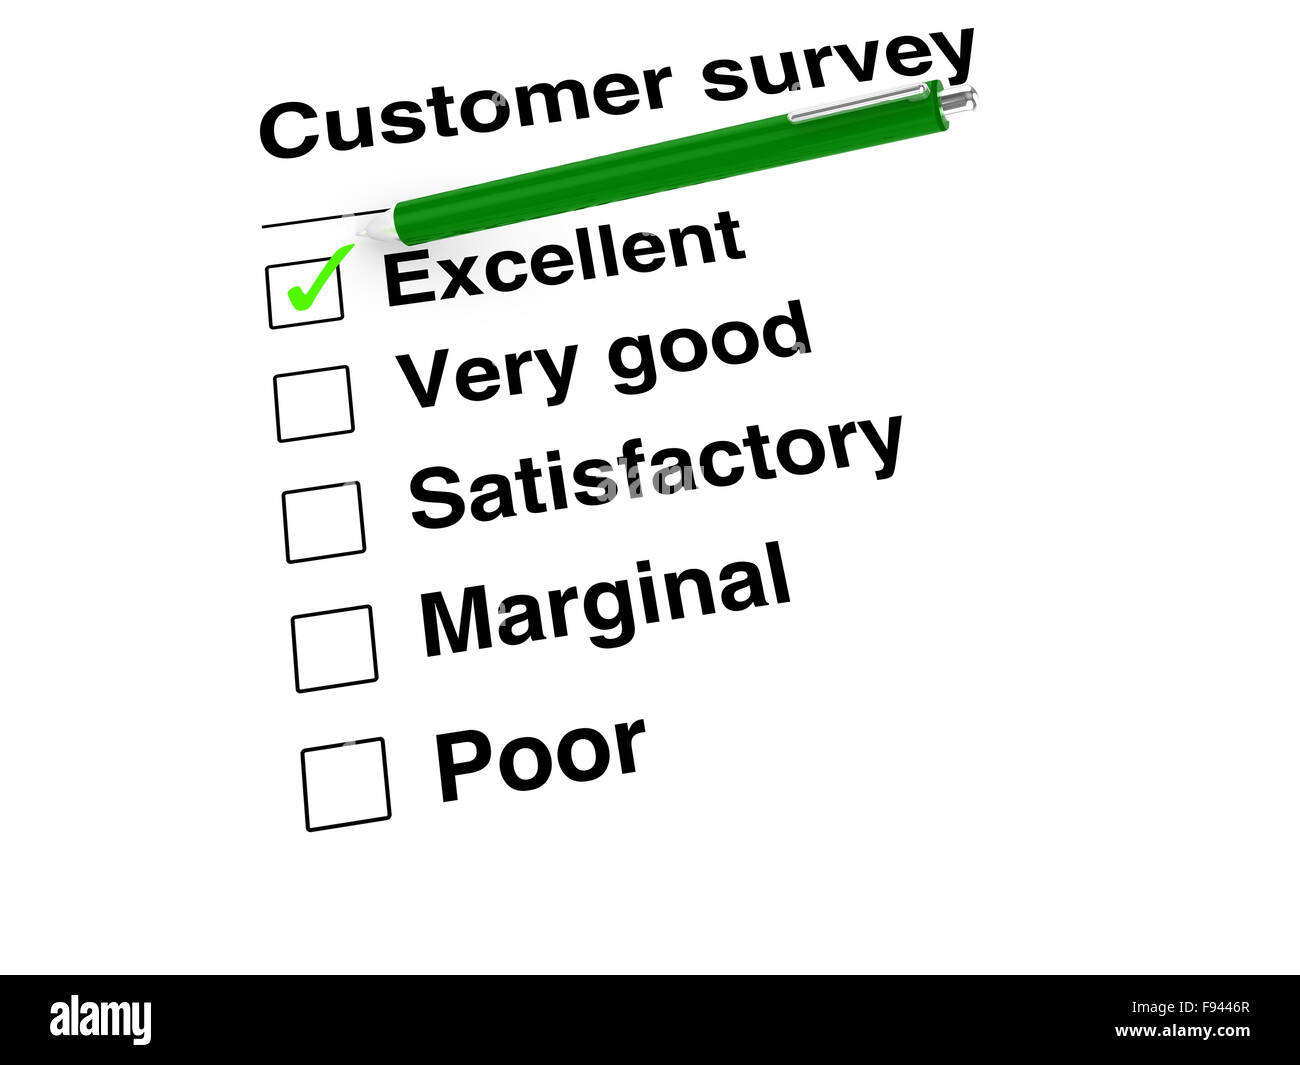 Green ball pen setting a green tick mark at excellent on customer satisfaction checklist illustration Stock Photo